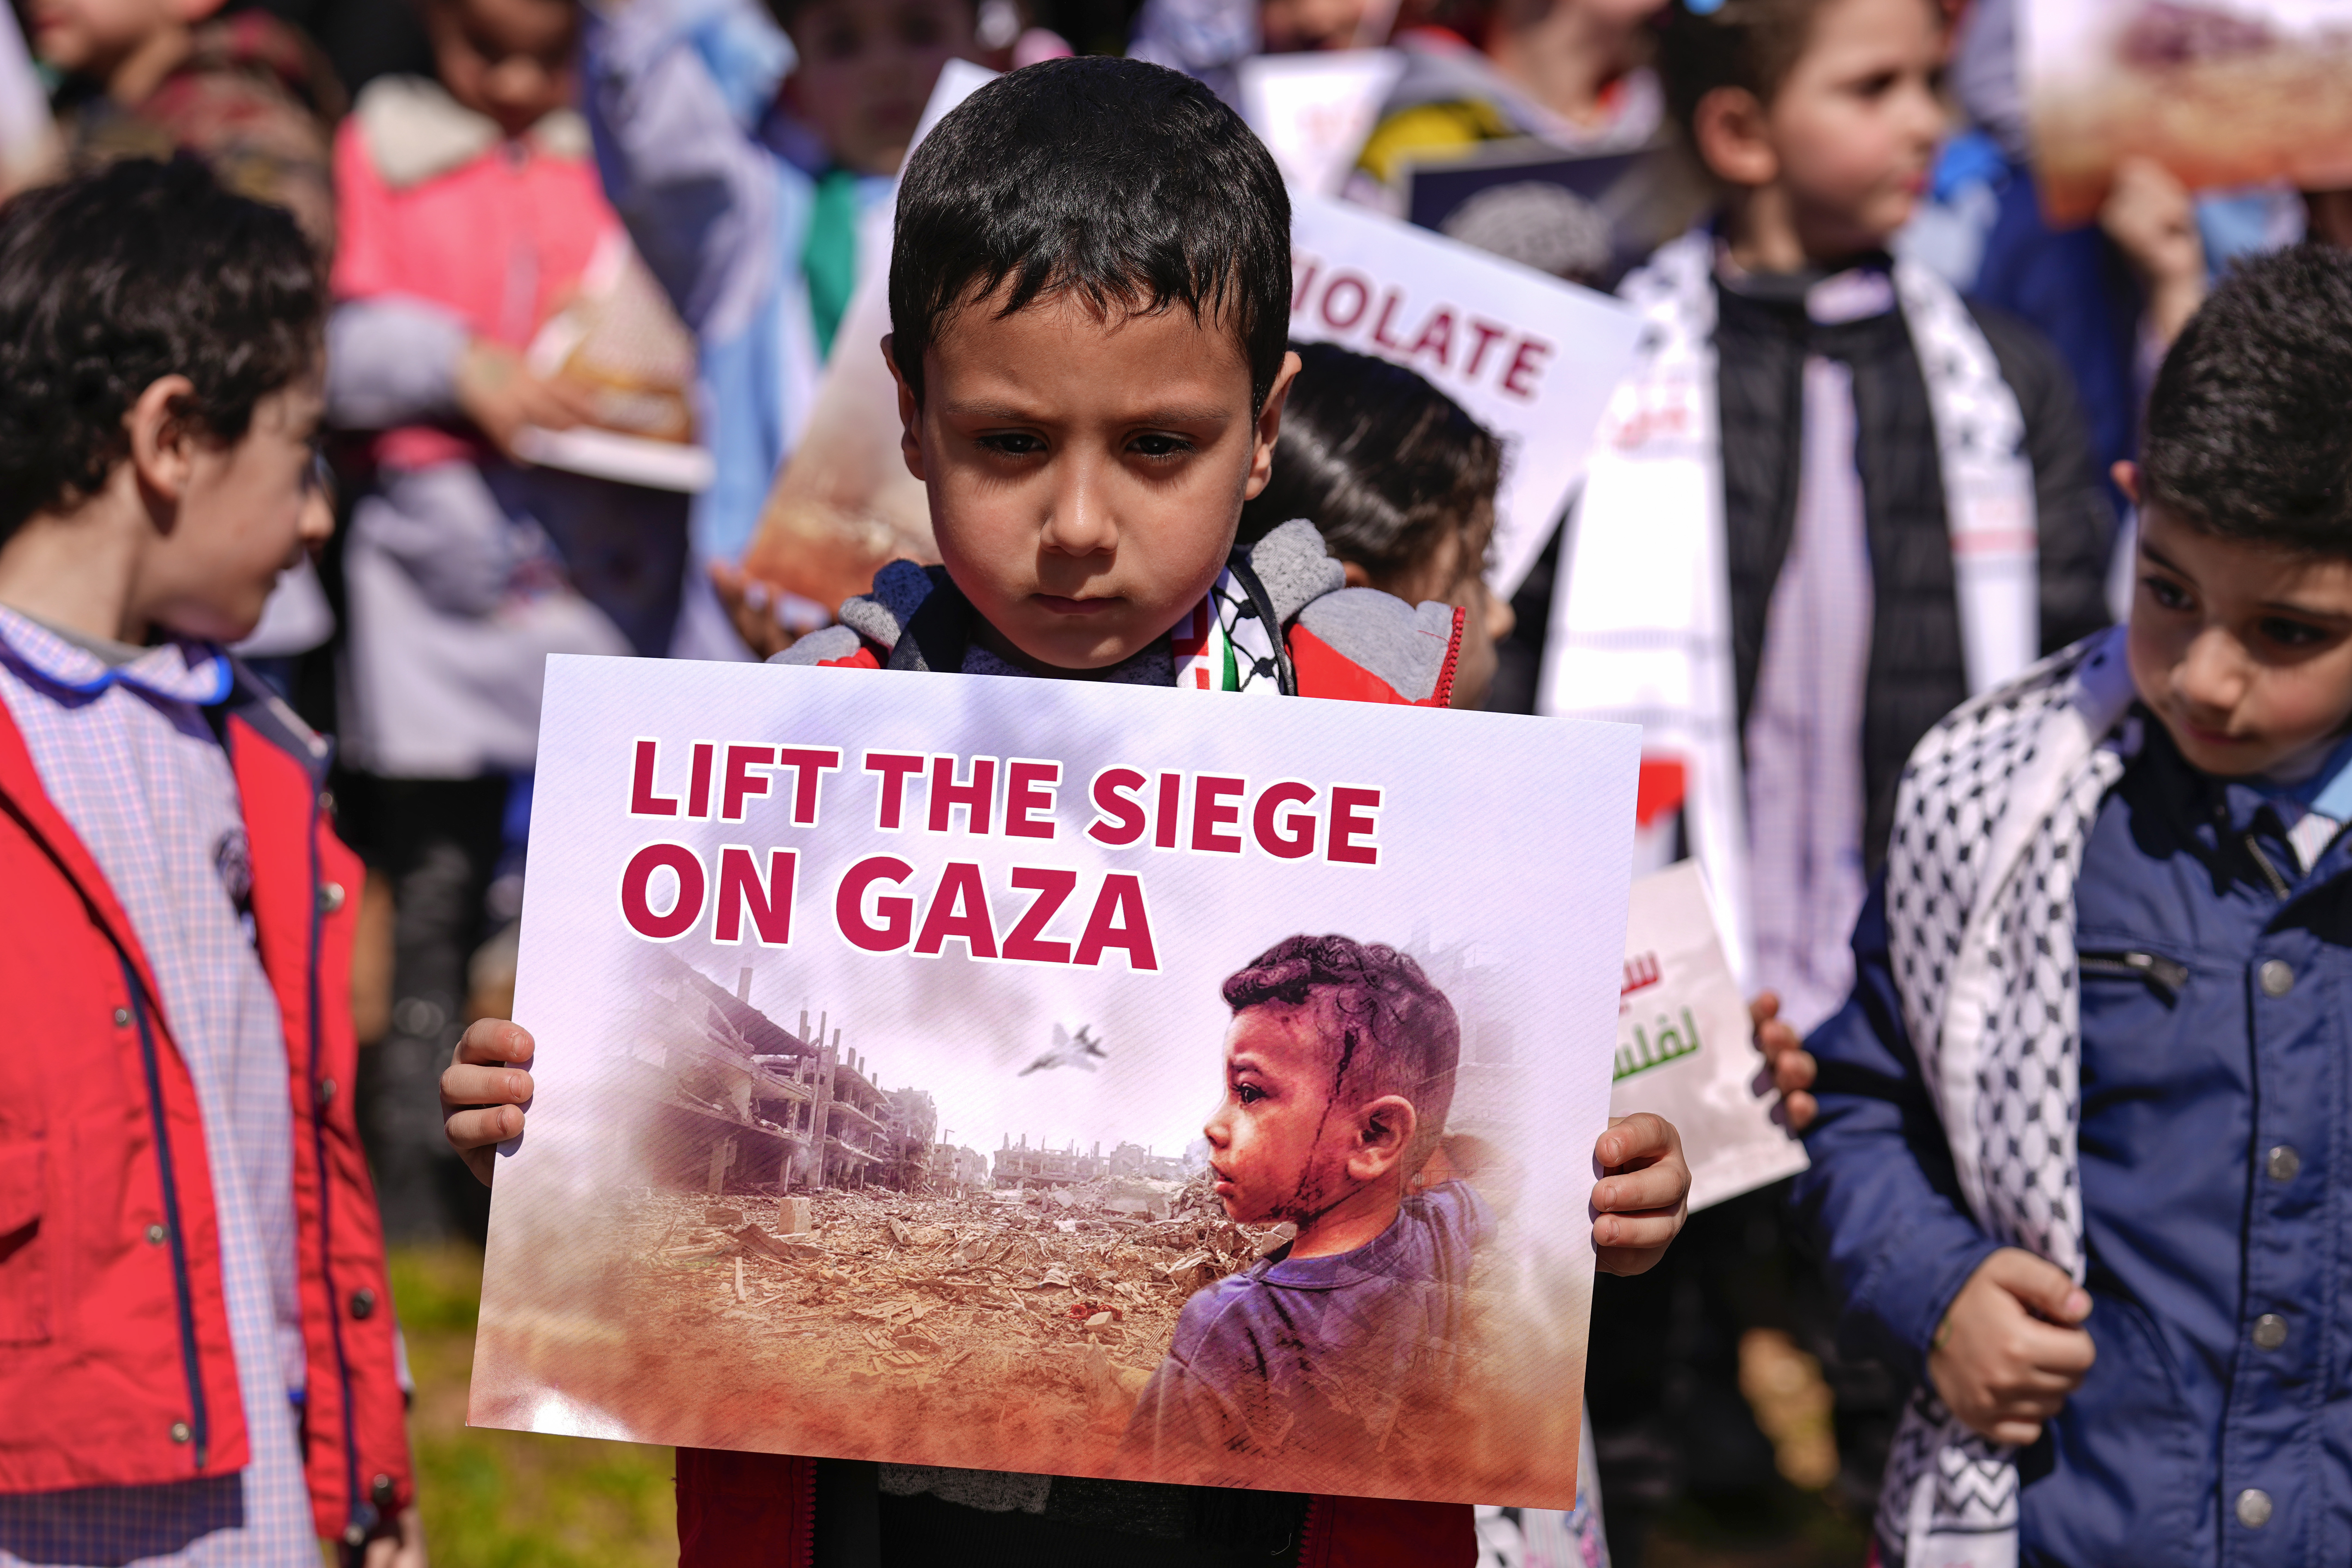 A Palestinian child living in Lebanon holds a placard during a protest to demand a ceasefire and support Palestinians in the Gaza Strip. /Bilal Hussein/AP 